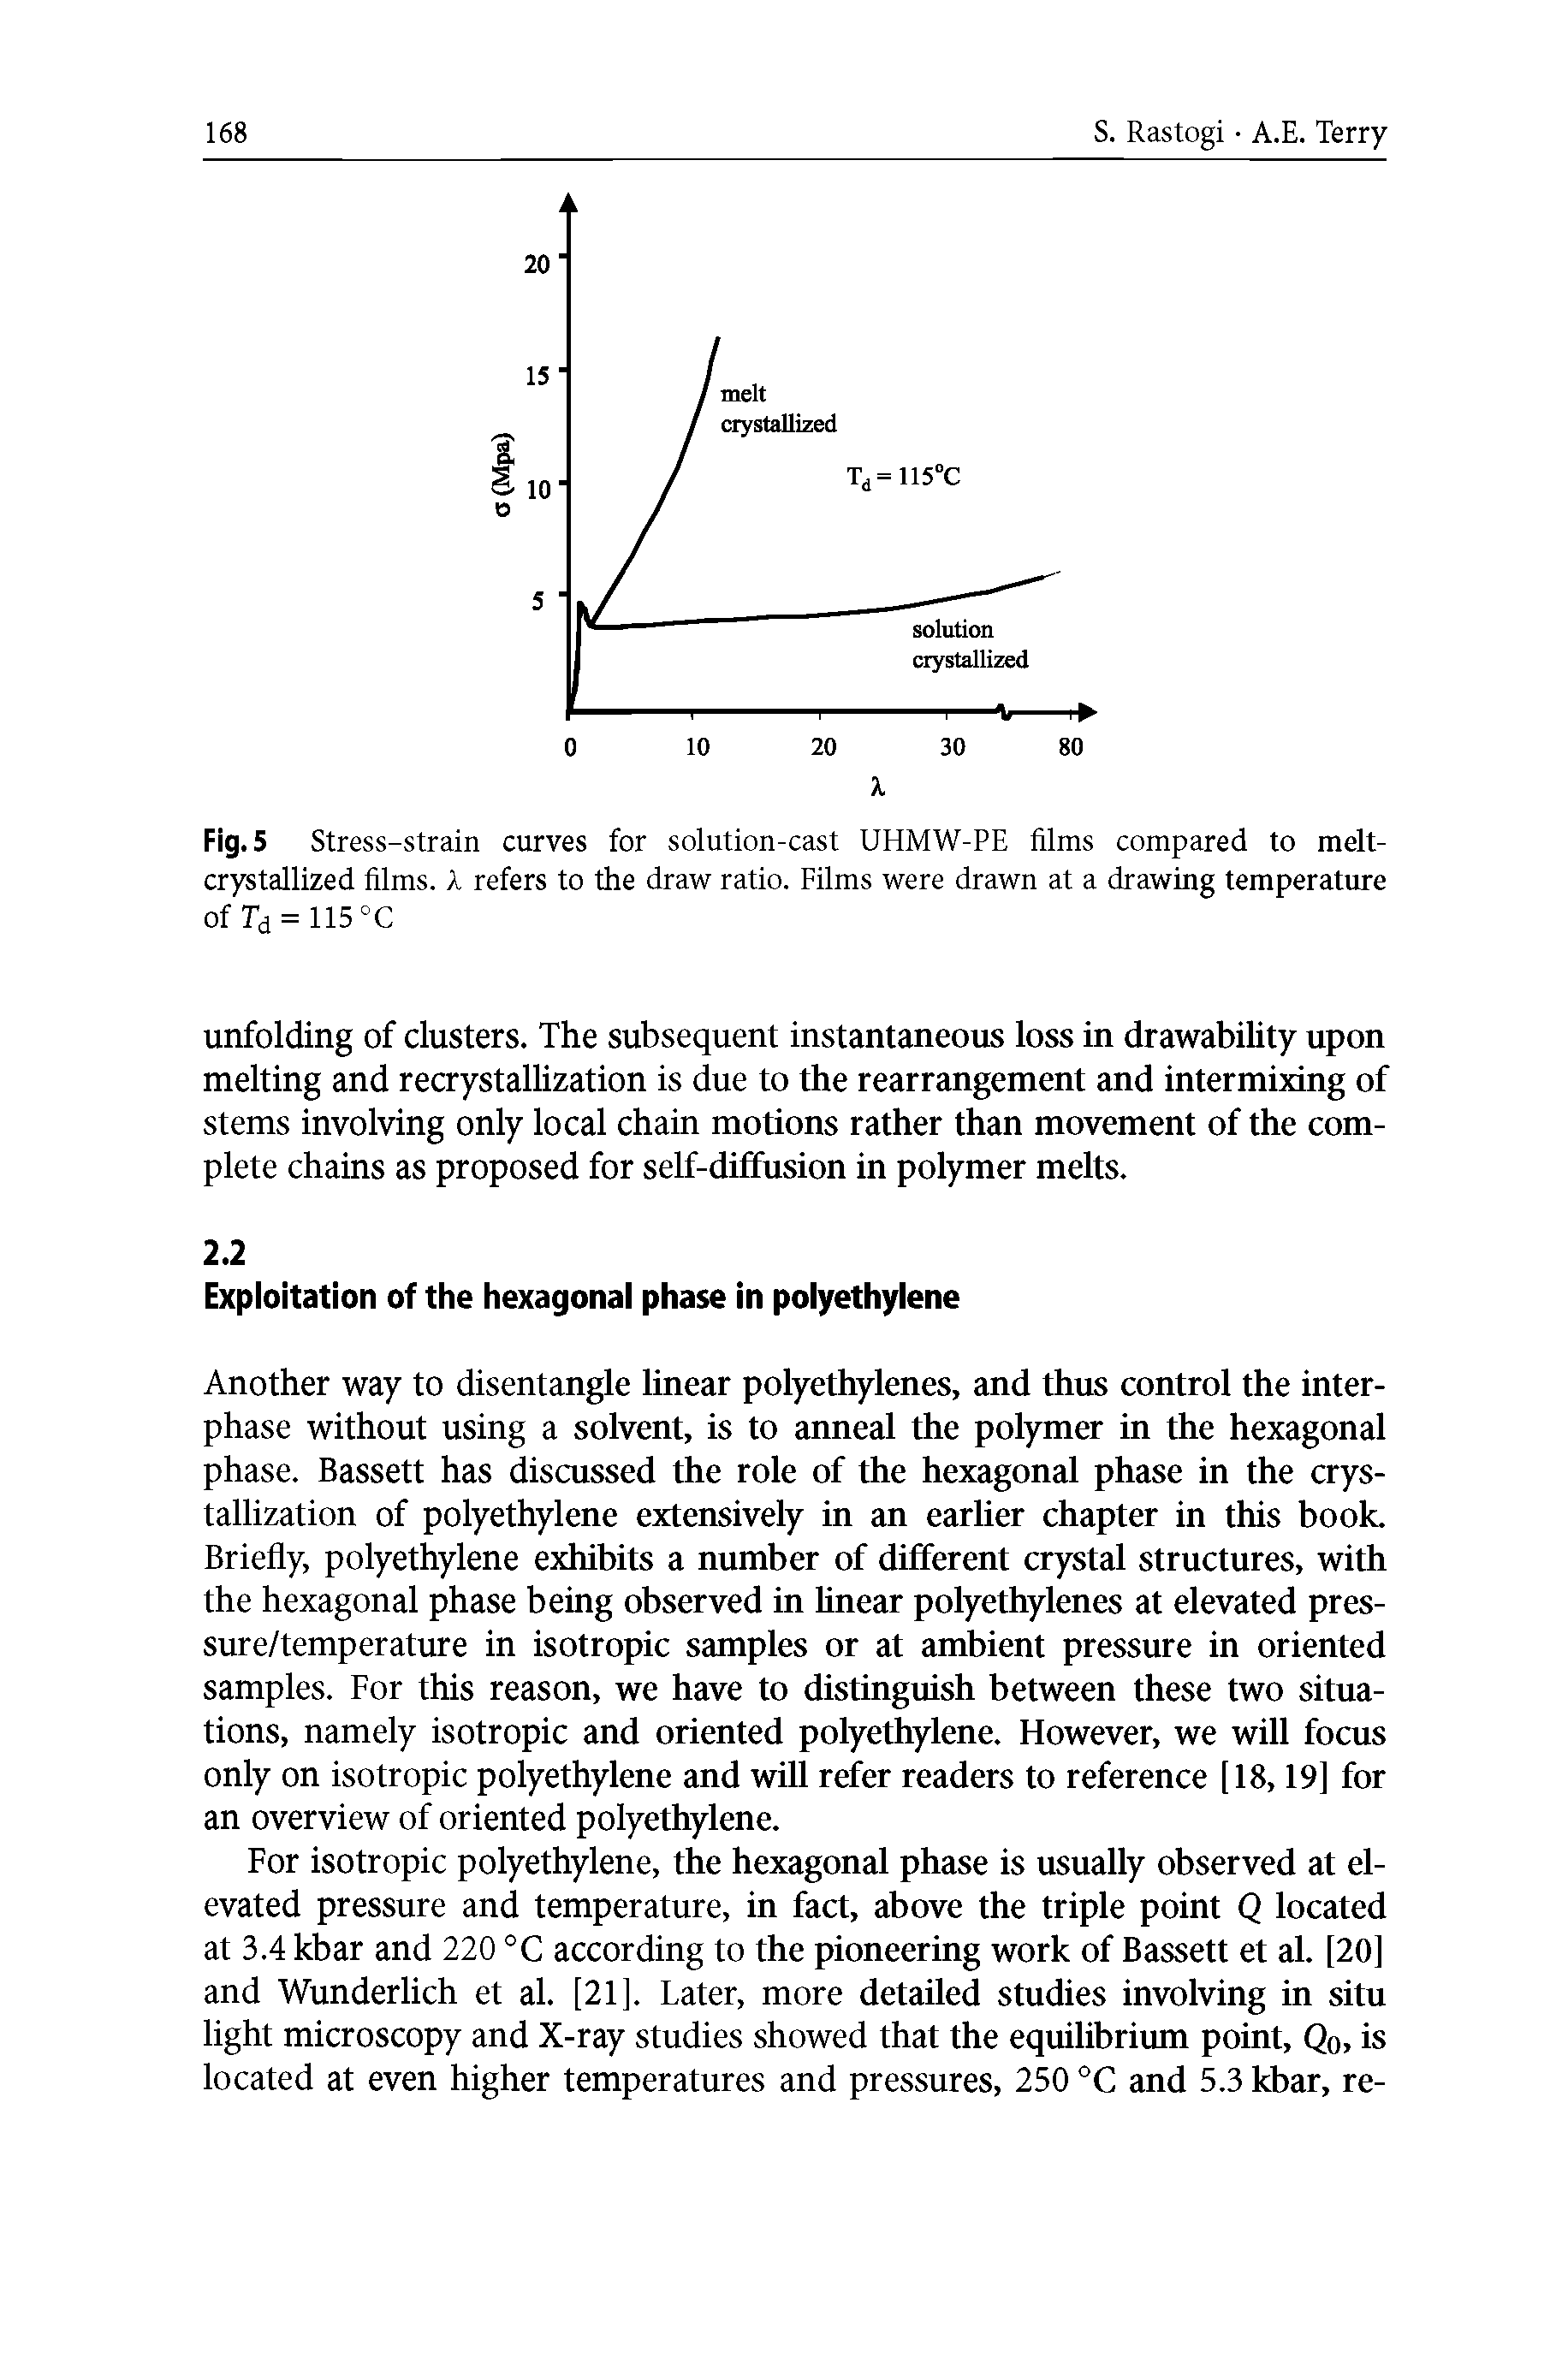 Fig. 5 Stress-strain curves for solution-cast UHMW-PE films compared to melt-crystallized films, k refers to the draw ratio. Films were drawn at a drawing temperature of Td = 115 °C...